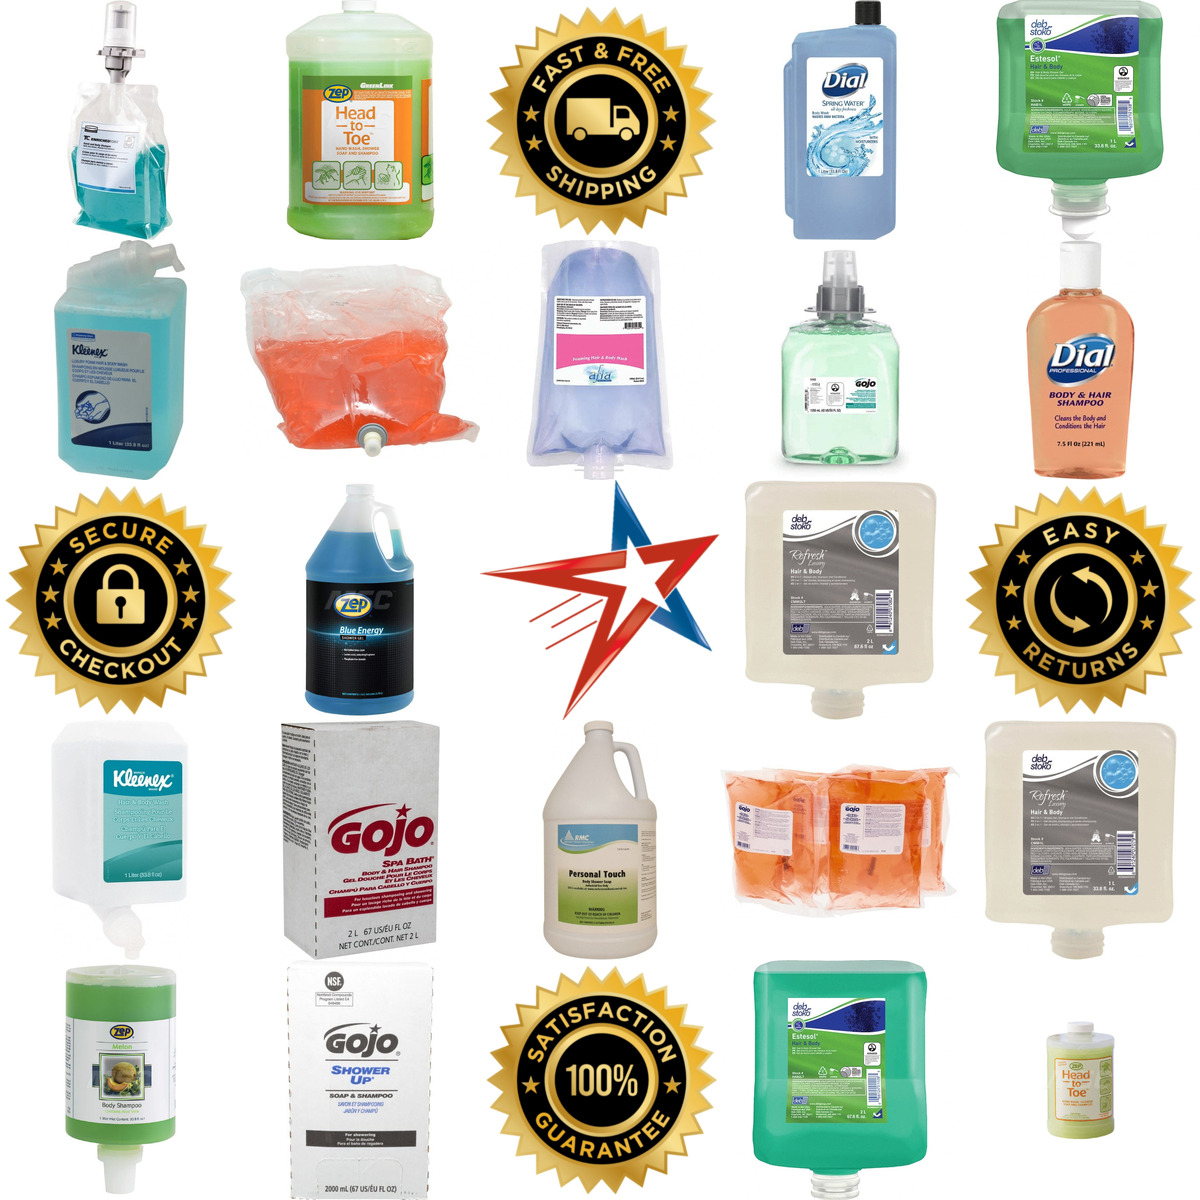 A selection of Shampoo and Body Wash products on GoVets